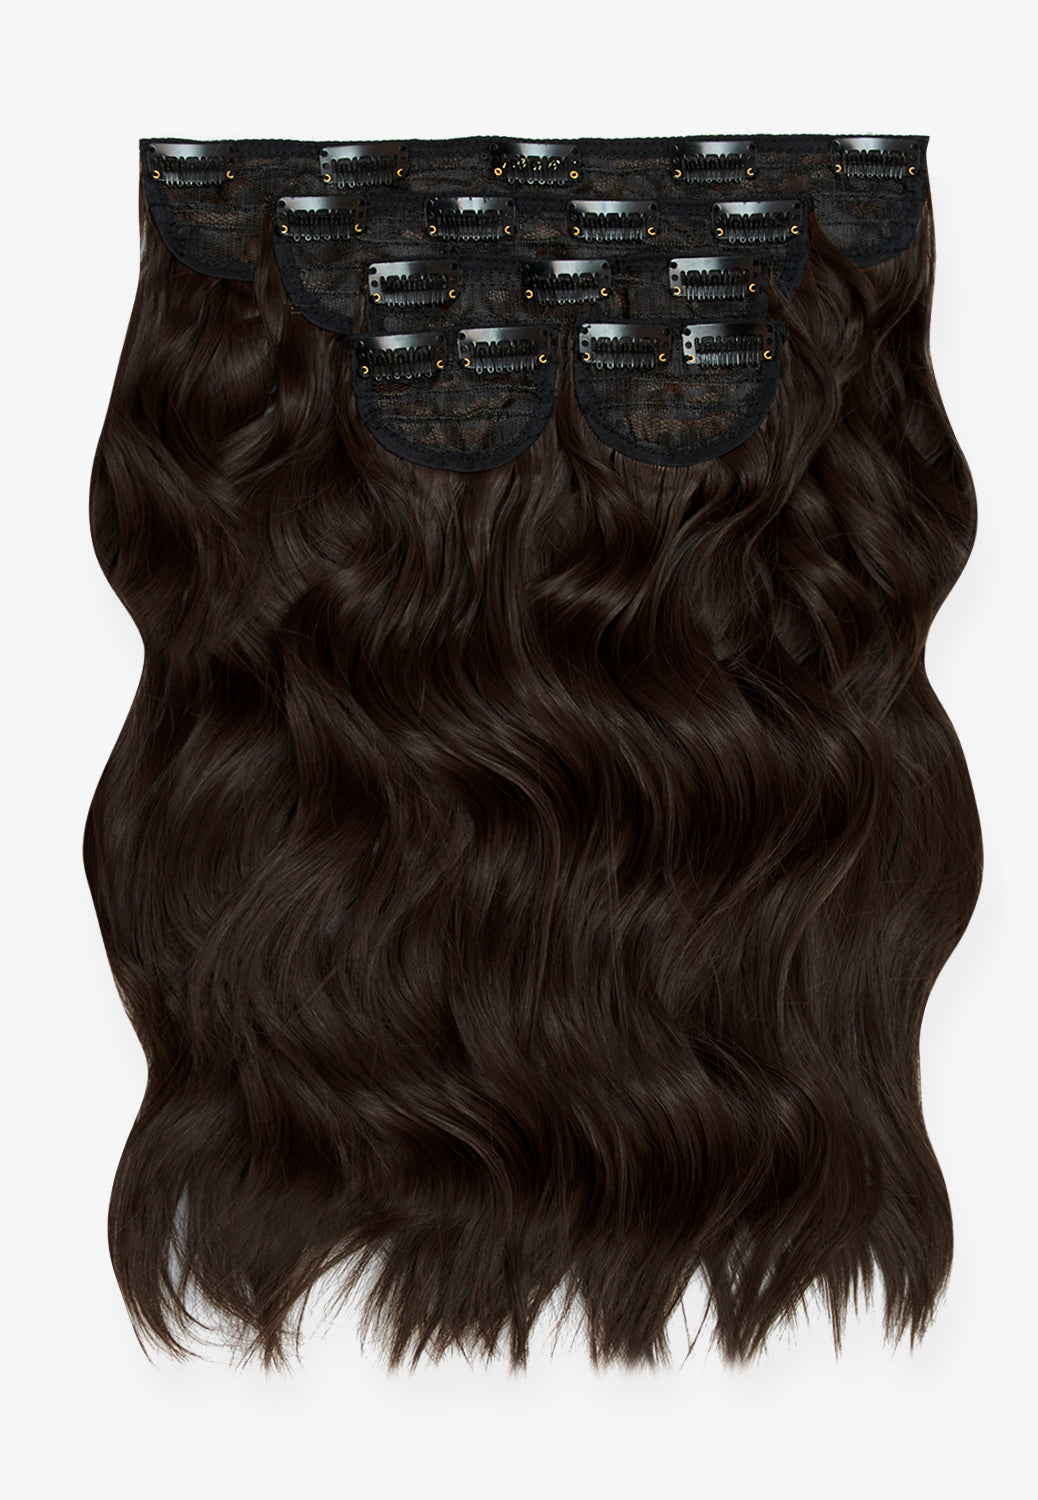 Super Thick 16’’ 5 Piece Brushed Out Wave Clip In Hair Extensions + Hair Care Bundle - Dark Brown